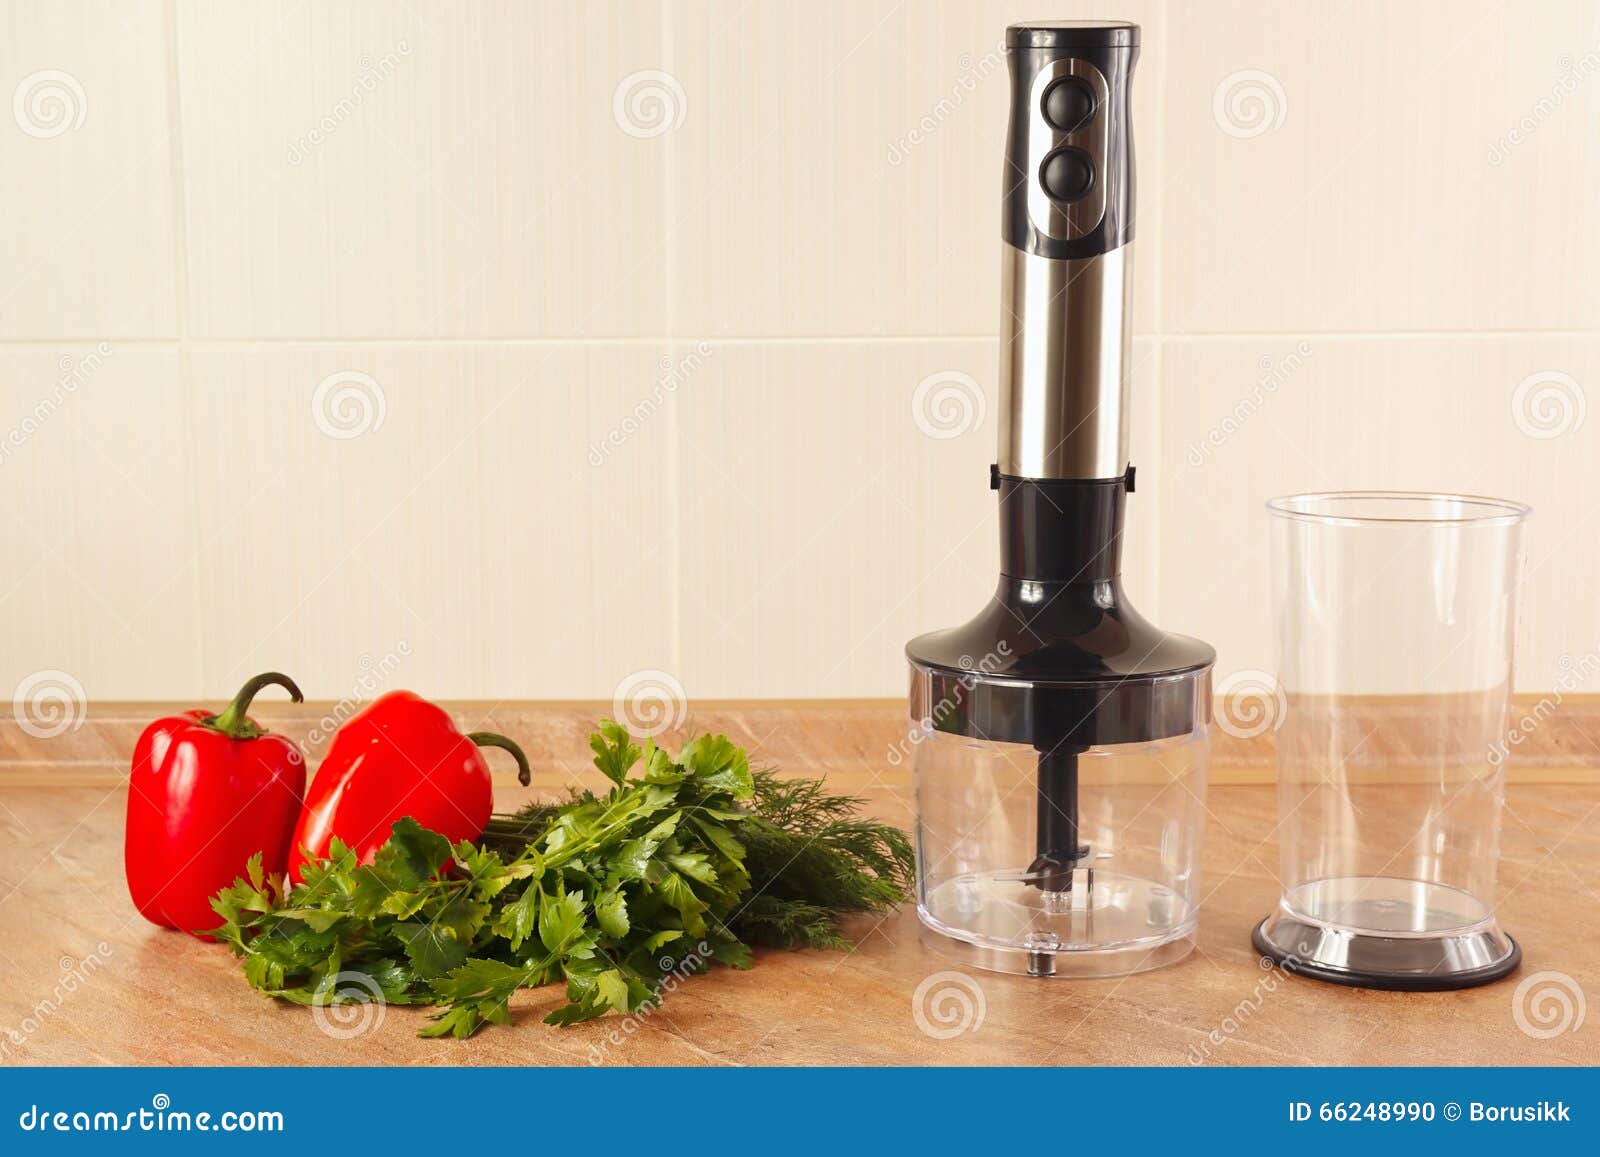 fresh red bellpepper with herbs and a blender on kitchen table